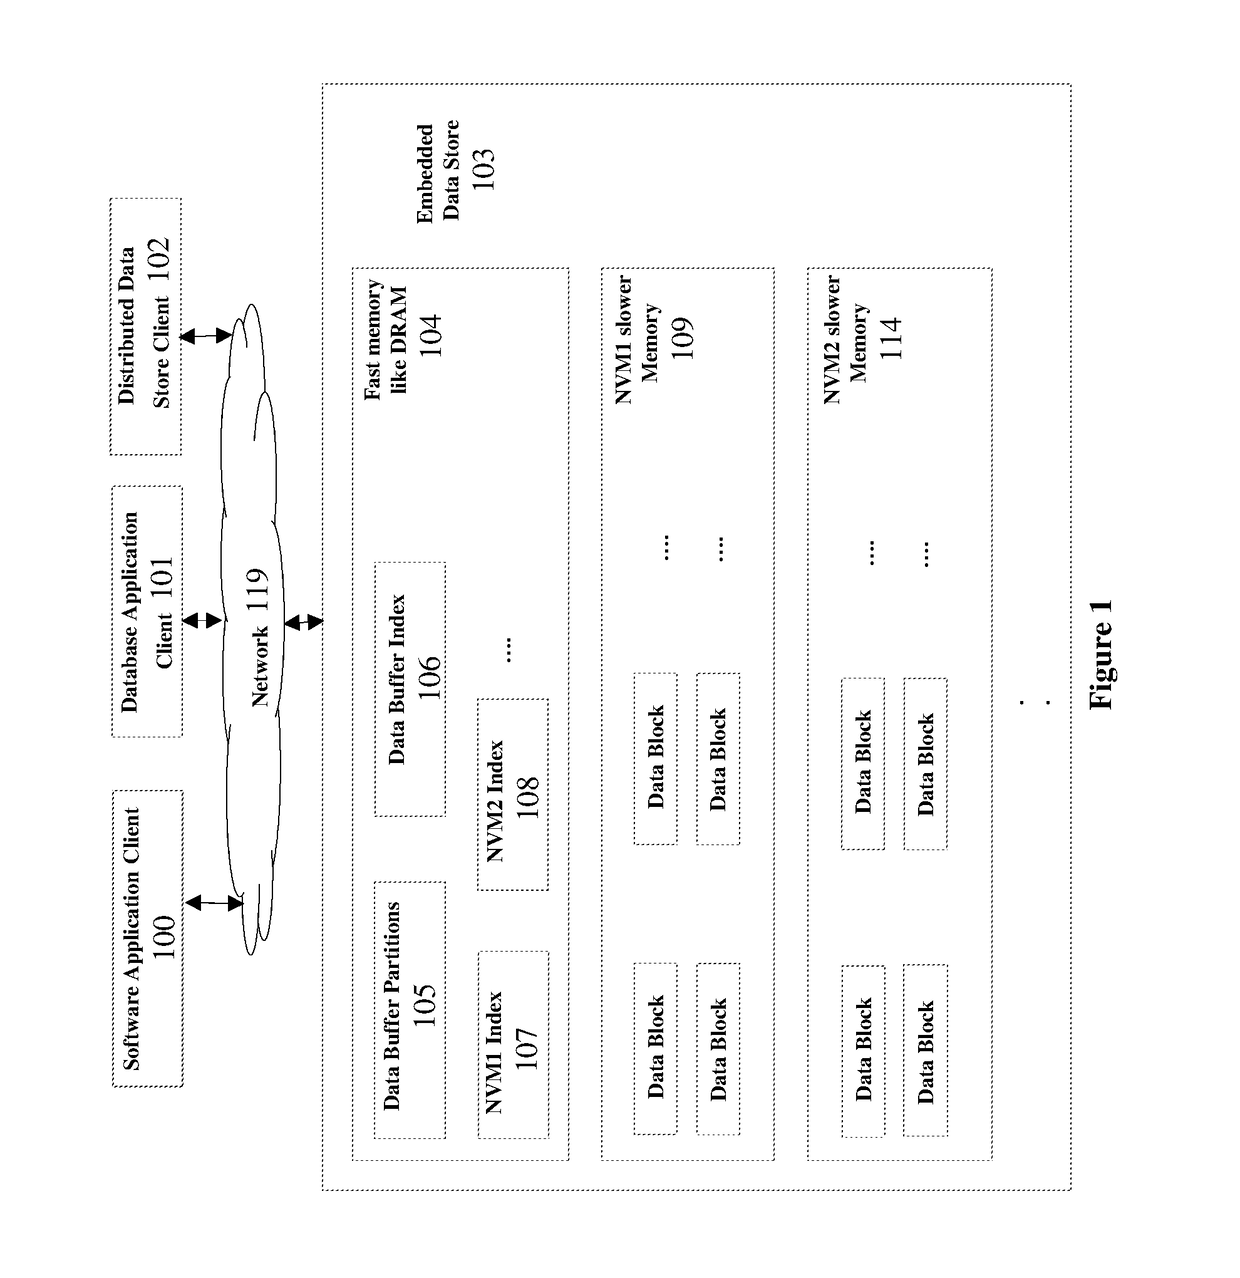 Adaptive prefix tree based order partitioned data storage system